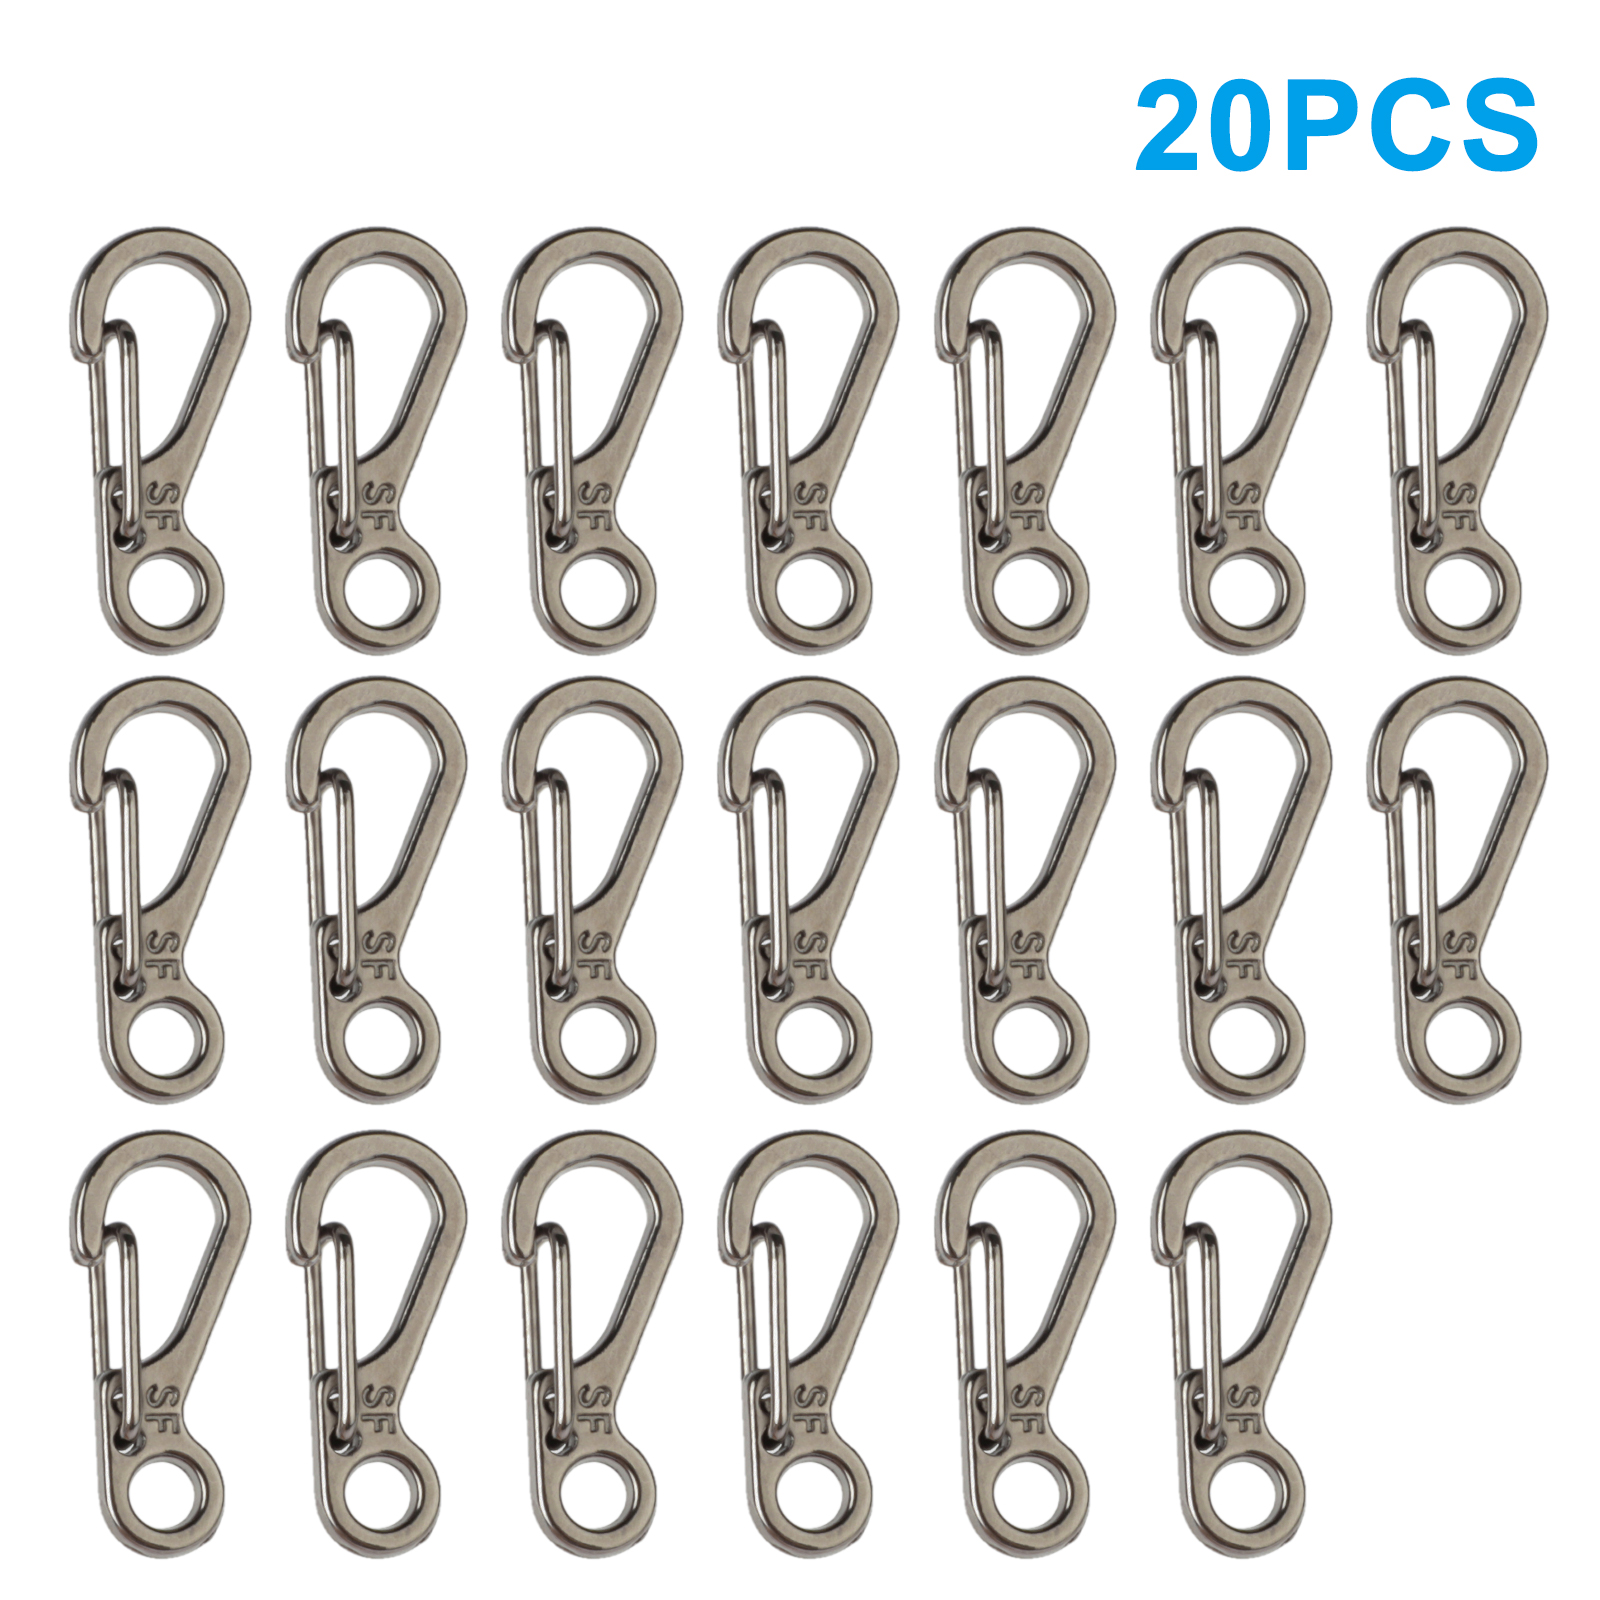 Details about   Mini Heavy Duty Aluminum Carabiner Key Chain Snap Hooks Clip Outdoor Camping*10 